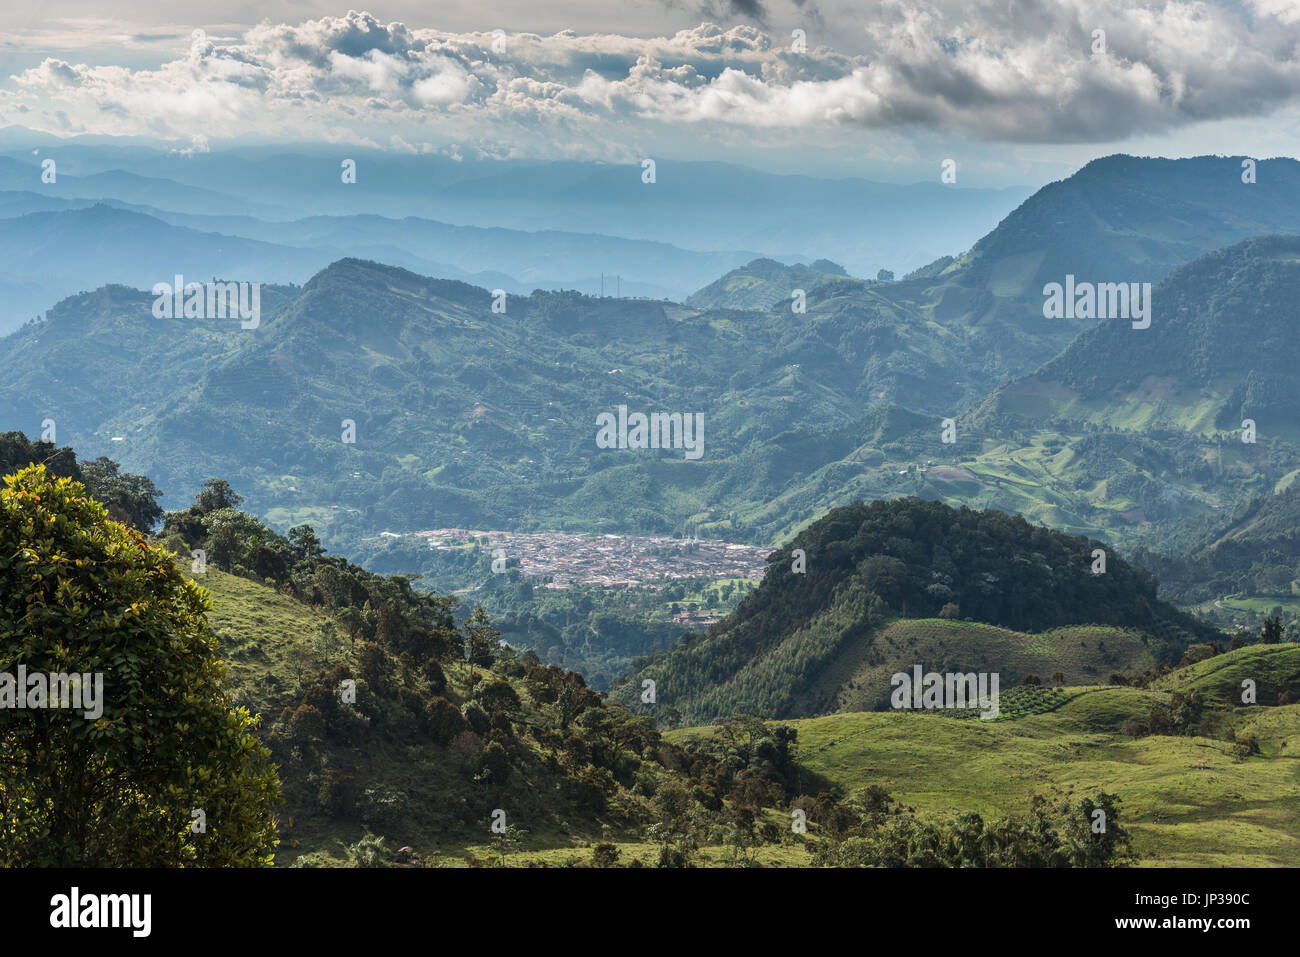 Jardin, a small town in the Andes Mountains. Colombia, South America Stock Photo